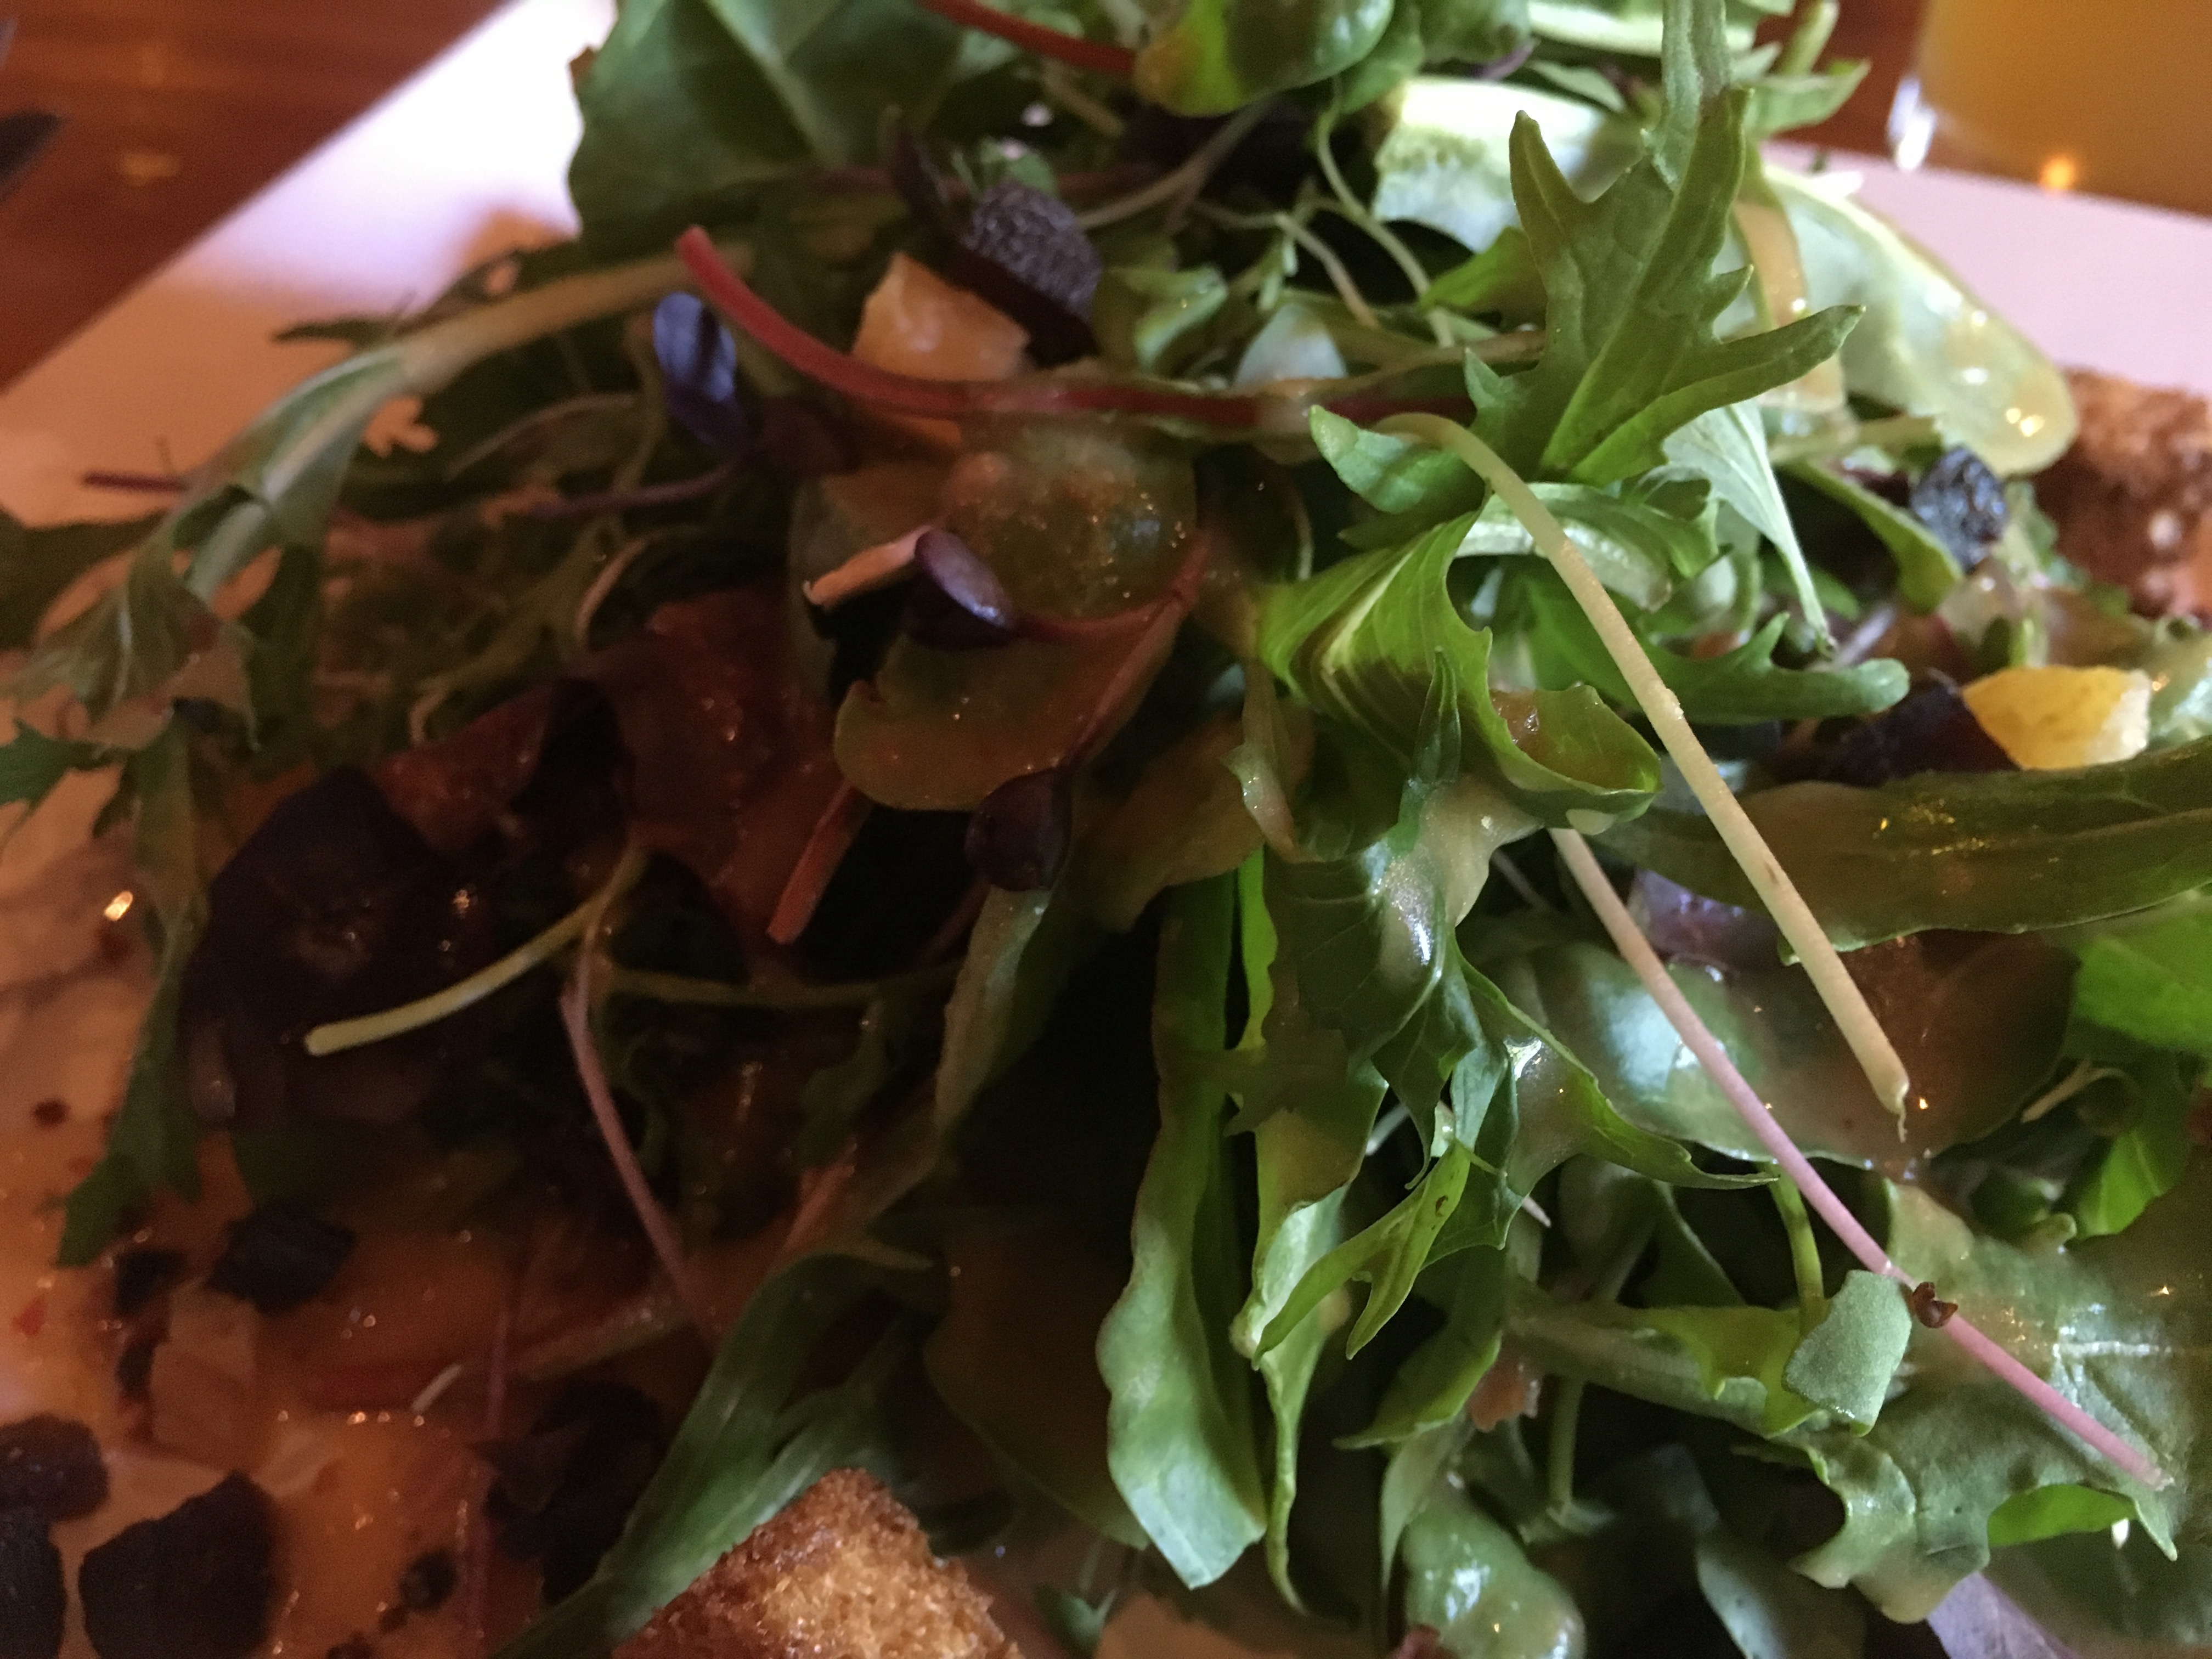 Third course will feature this micro green salad. (photo by D.J. Paul)